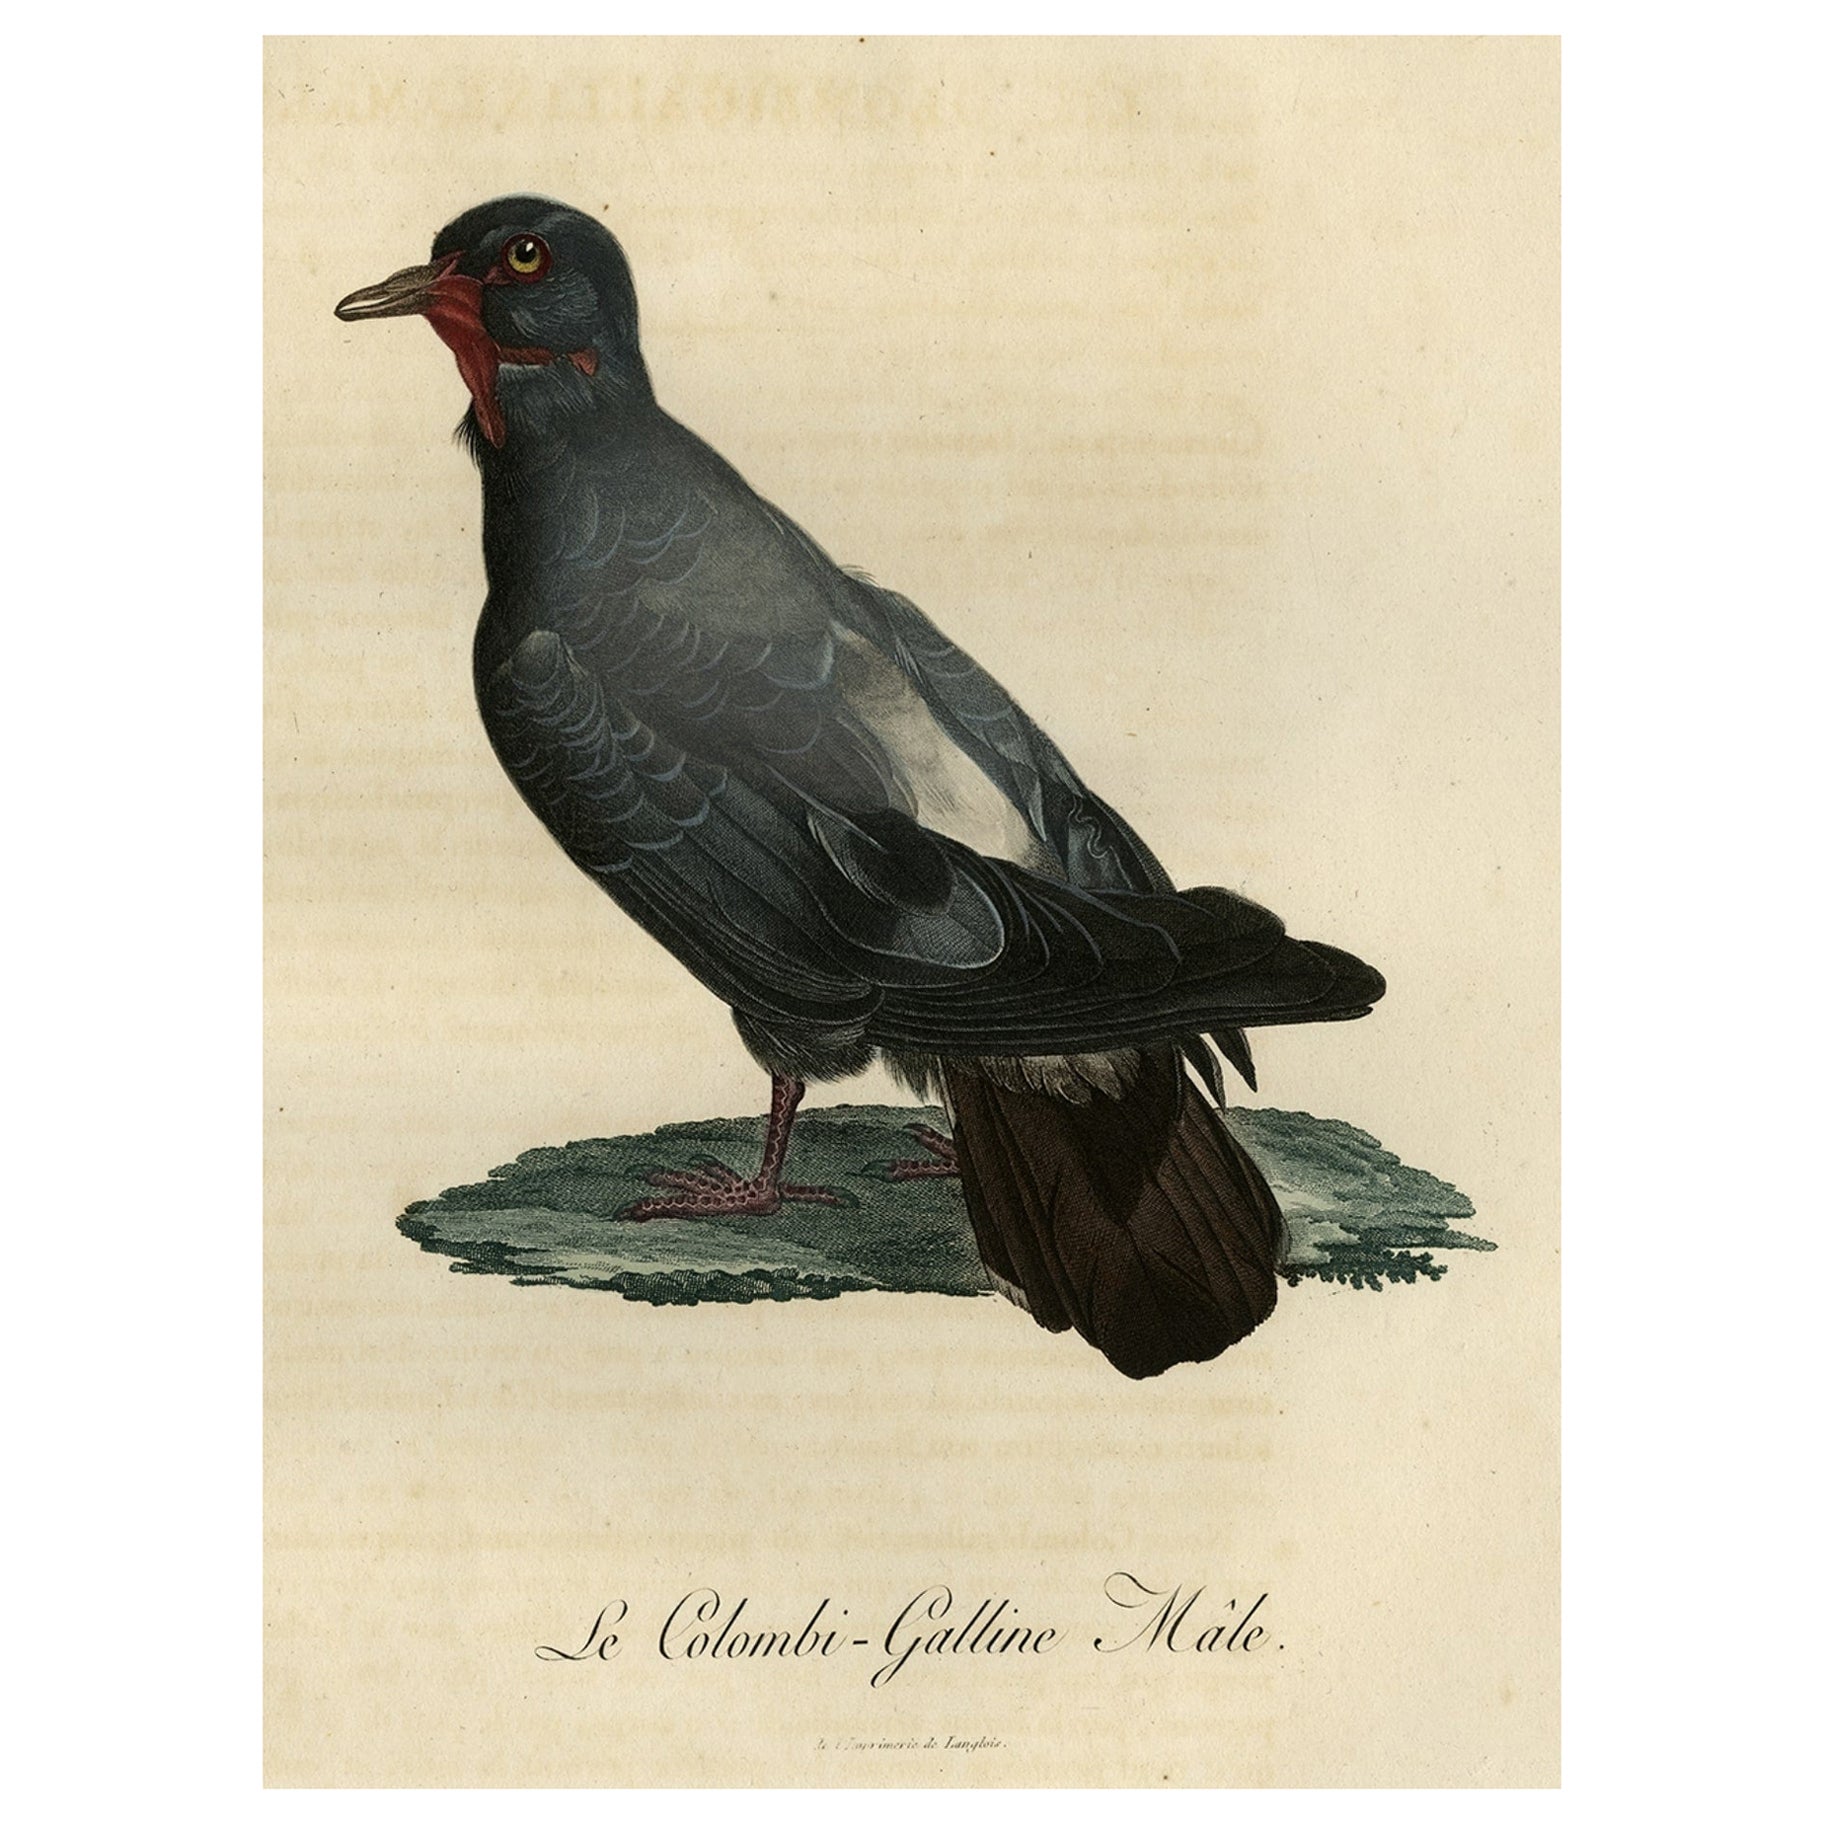 Antique Handcolored Bird Print of a Dove Named Le Colombi-Galline, Male, 1800 For Sale